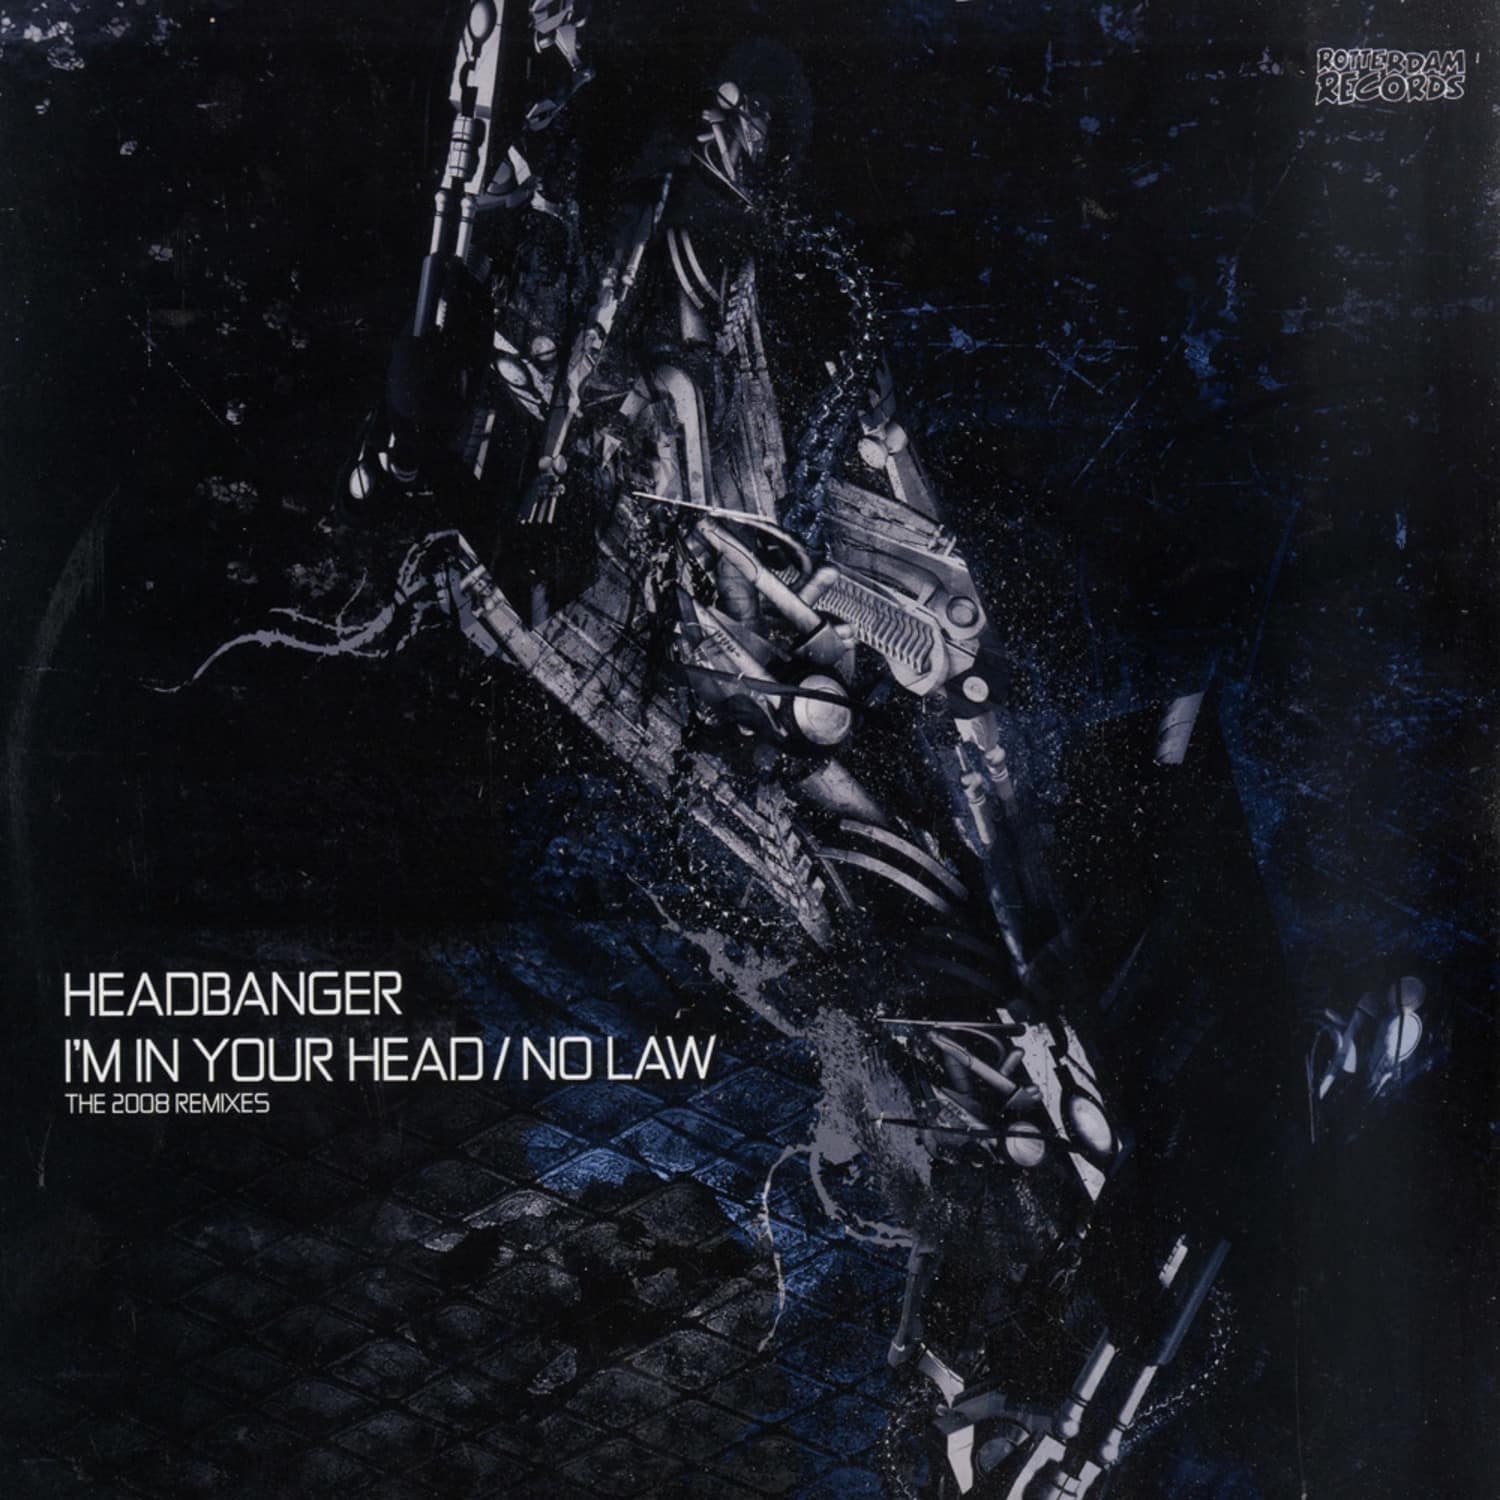 Headbanger - I M IN YOUR HEAD/NO LAW - THE 2008 REMIX